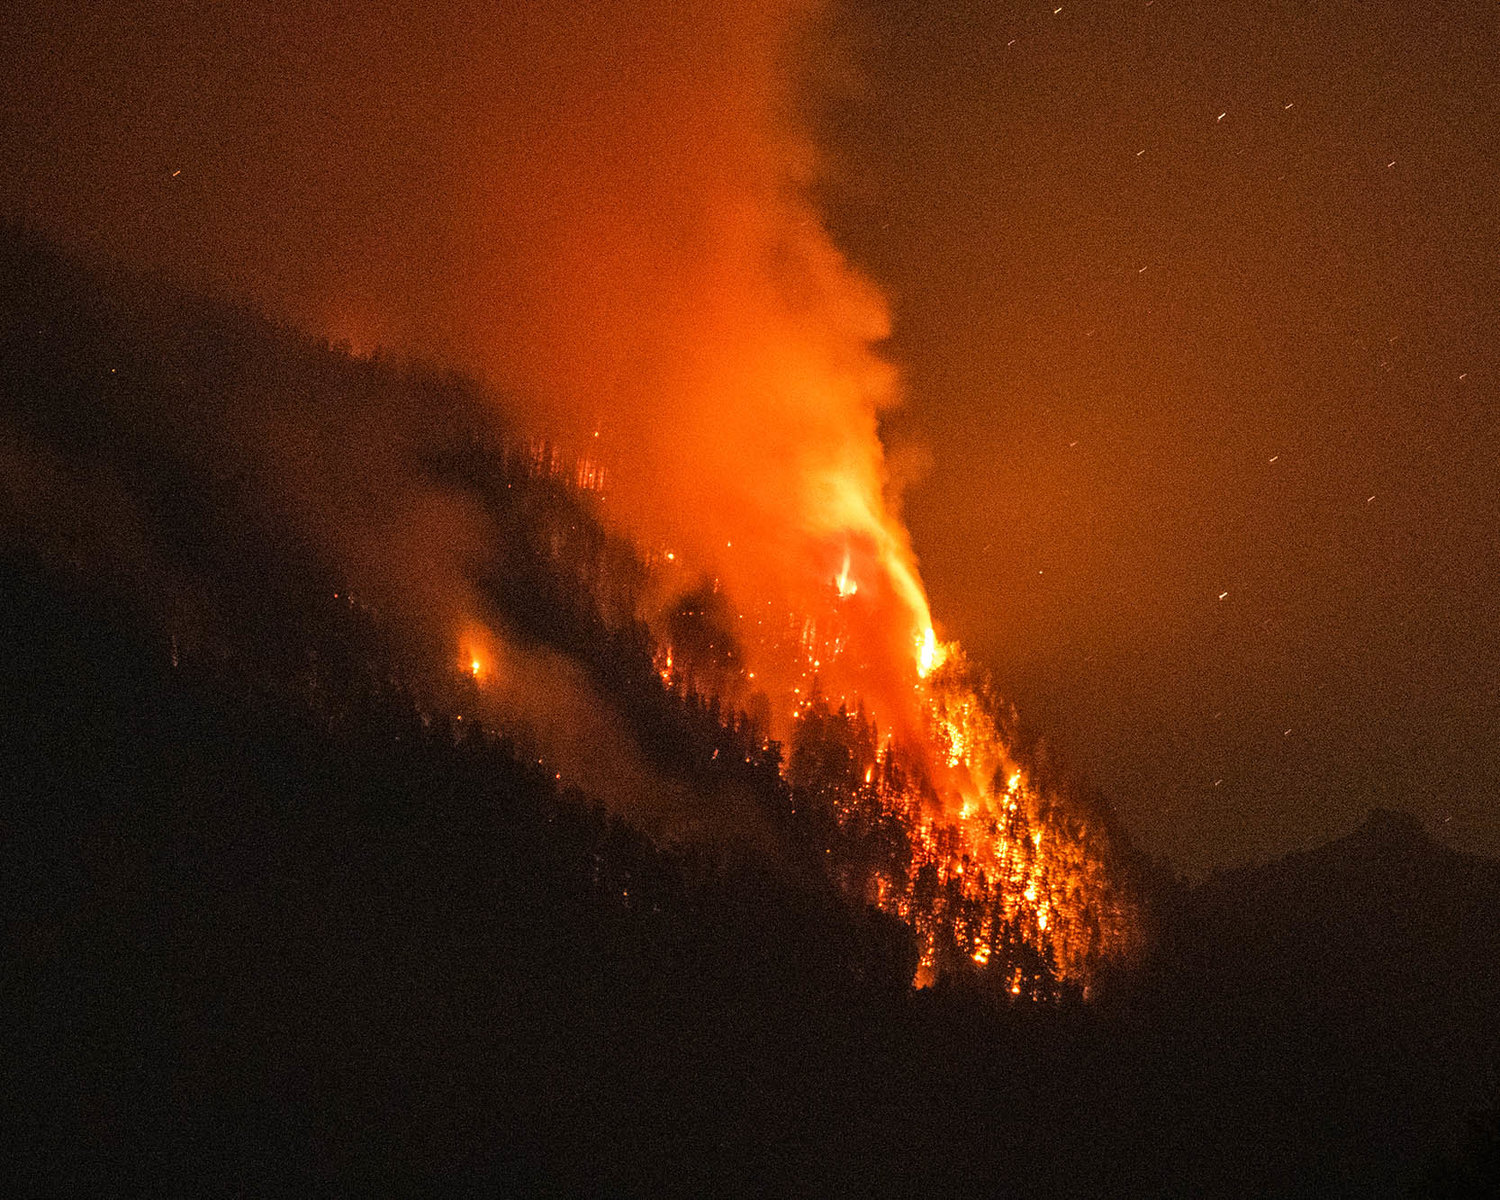 Flames from the Goat Rocks Fire ignites trees Sunday night as seen from Cannon Road in Packwood over Butler Creek.